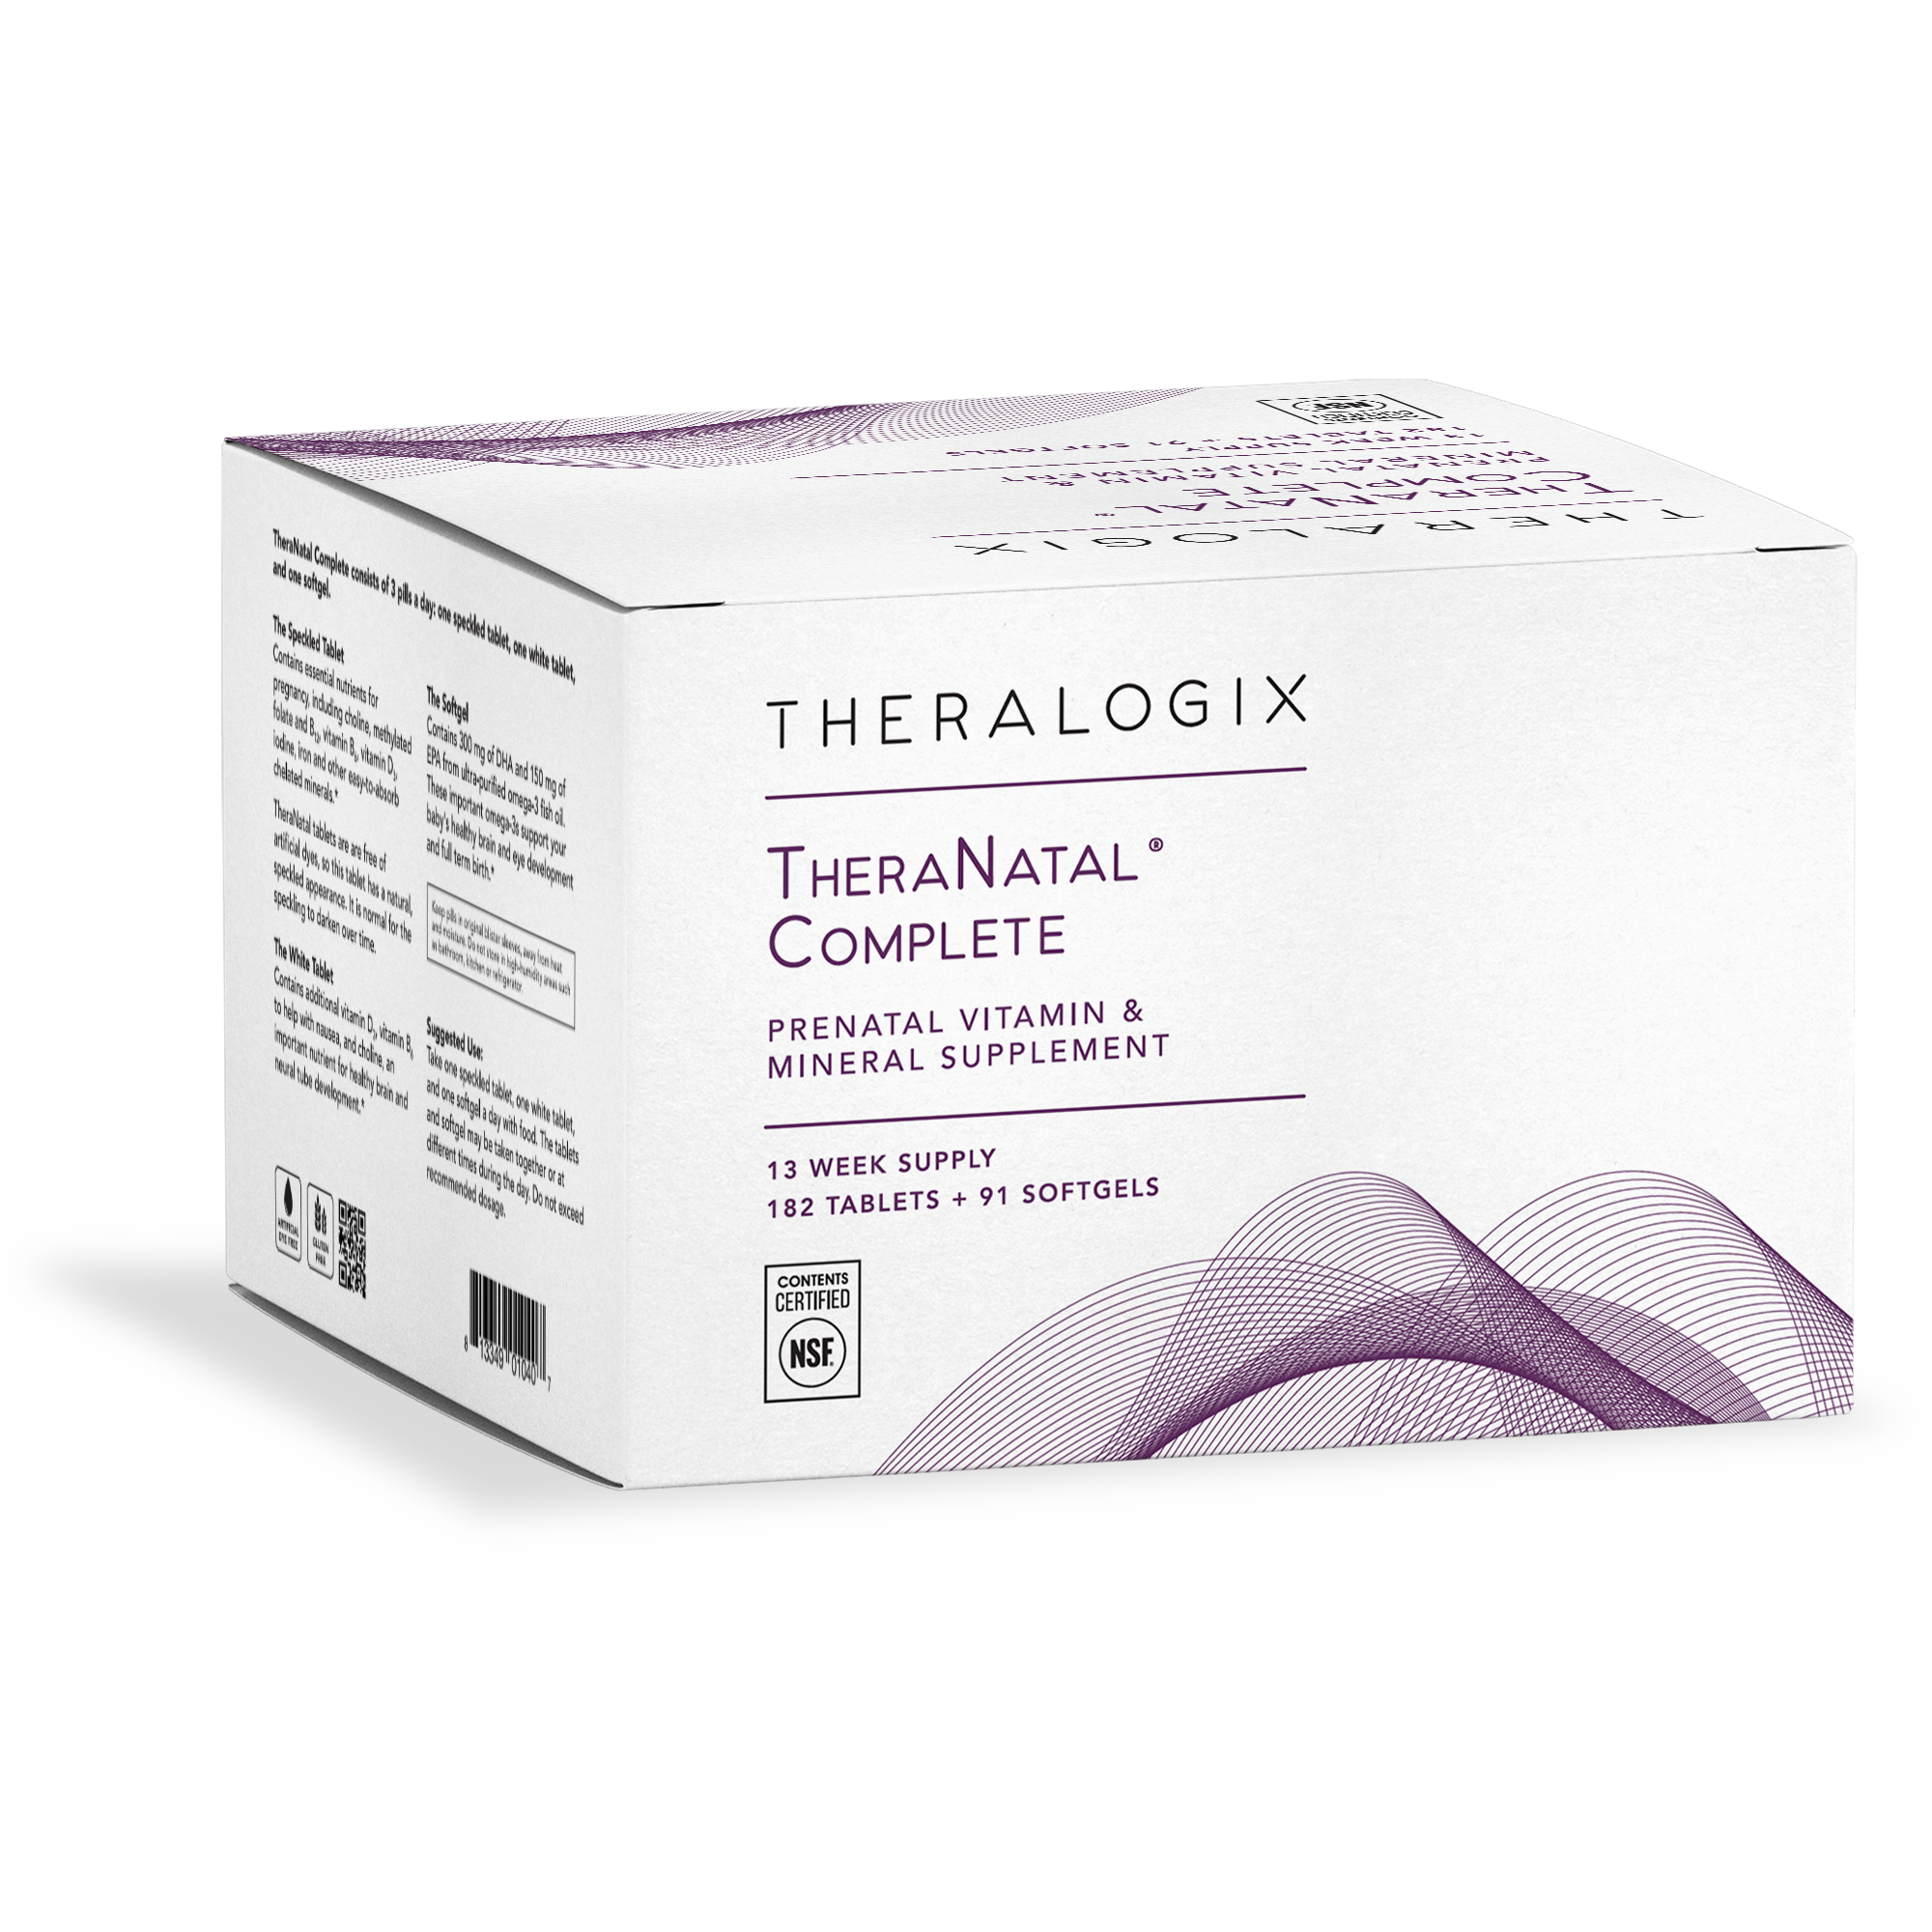 Physician recommended TheraNatal Complete supports a healthy pregnancy and your baby's brain development*.